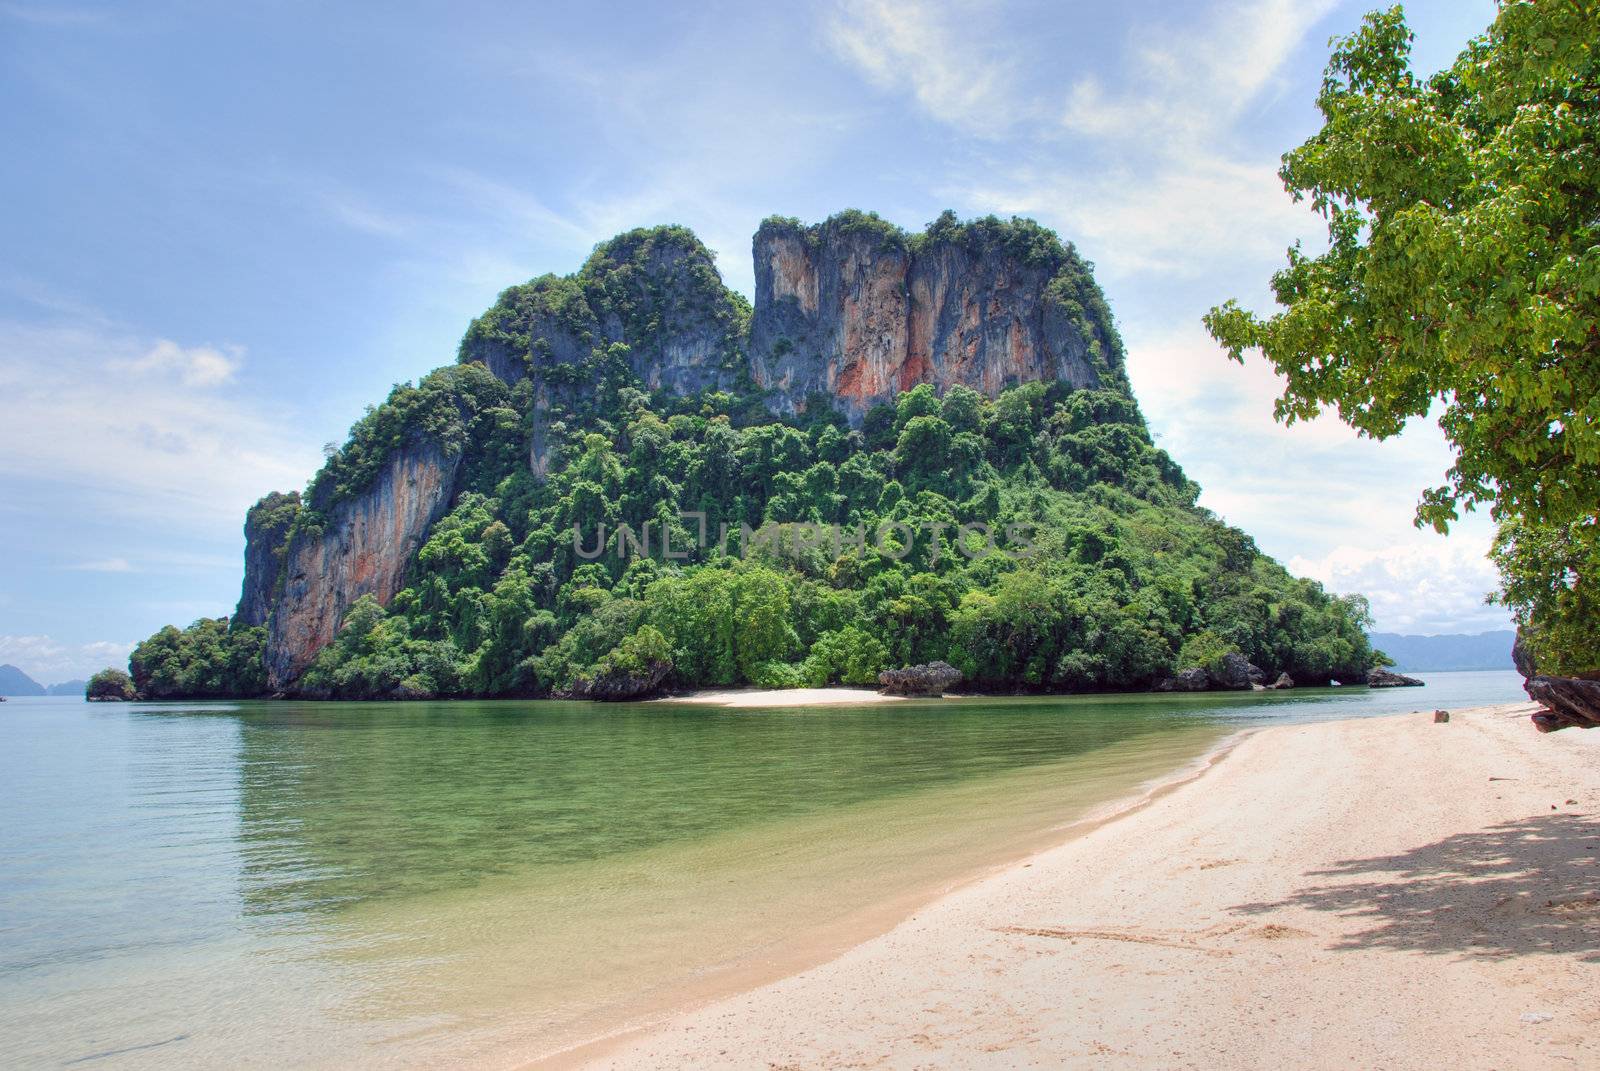 Detail of a Thailand Island with water and vegetation